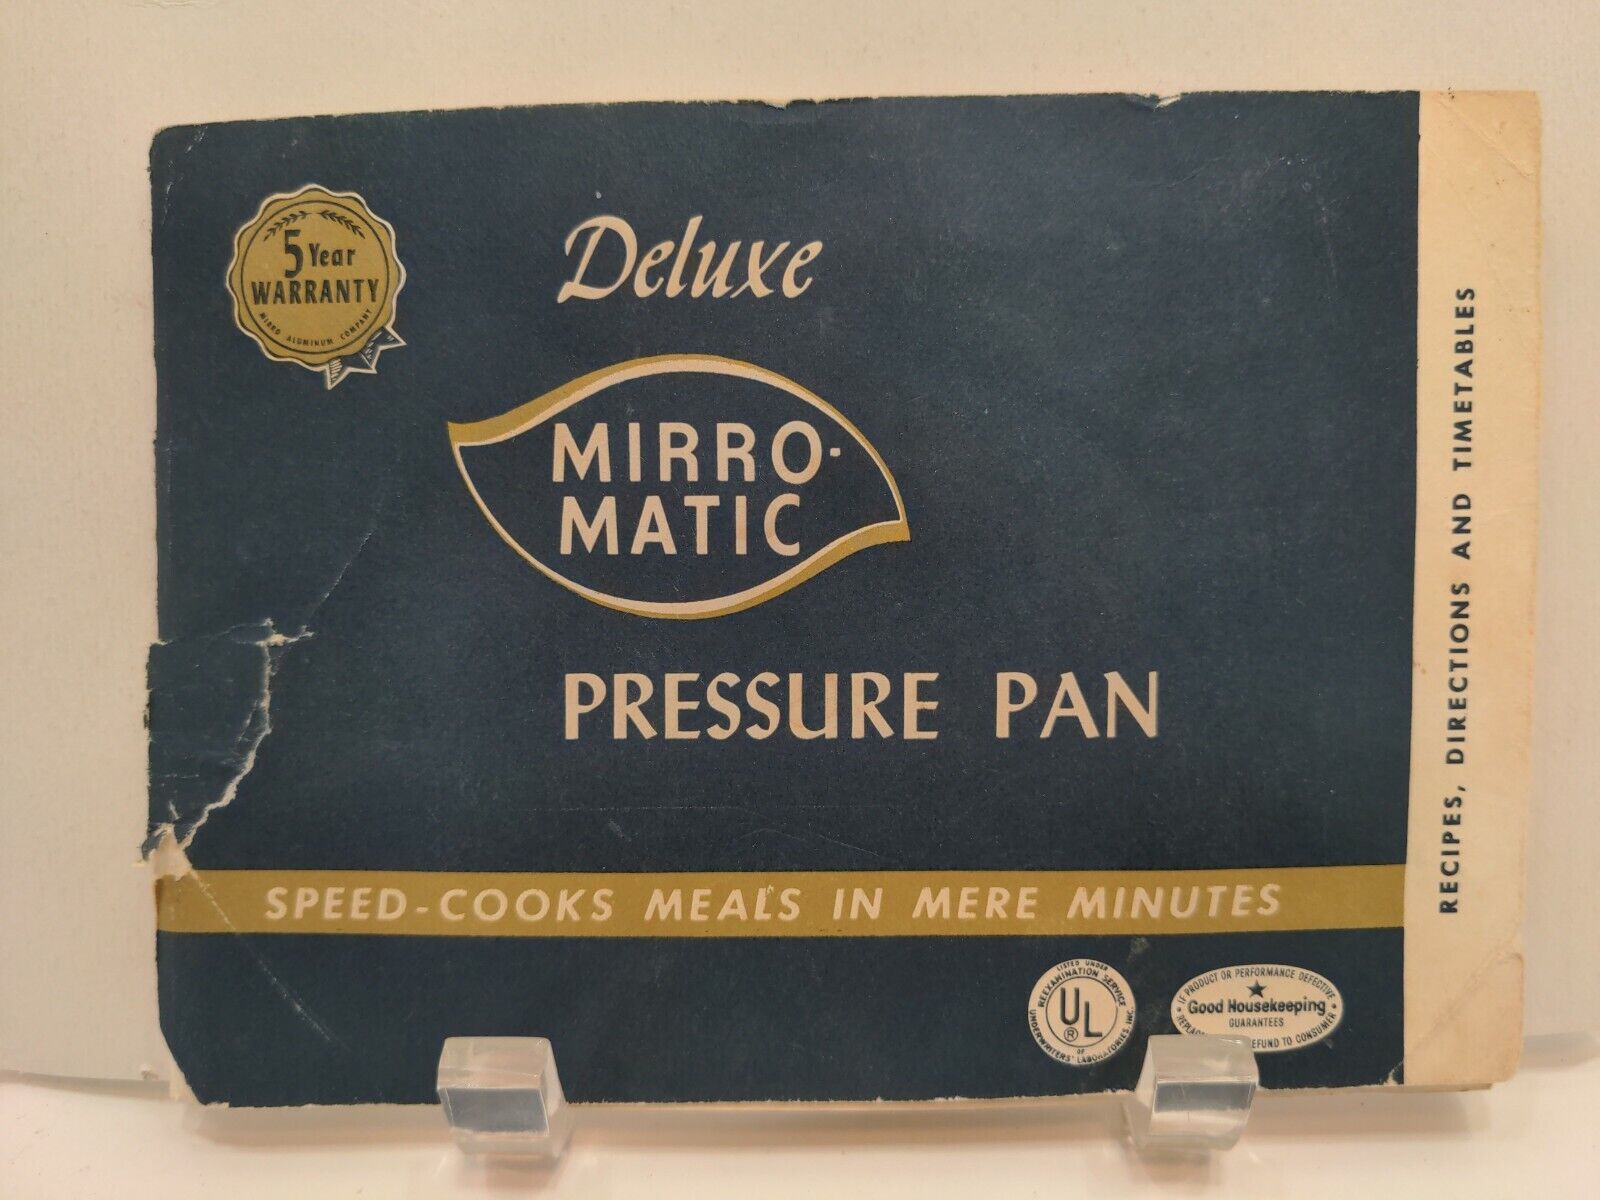 Deluxe Mirro Matic Pressure Pan Recipes Directions and Timetables Pamphlet    C7